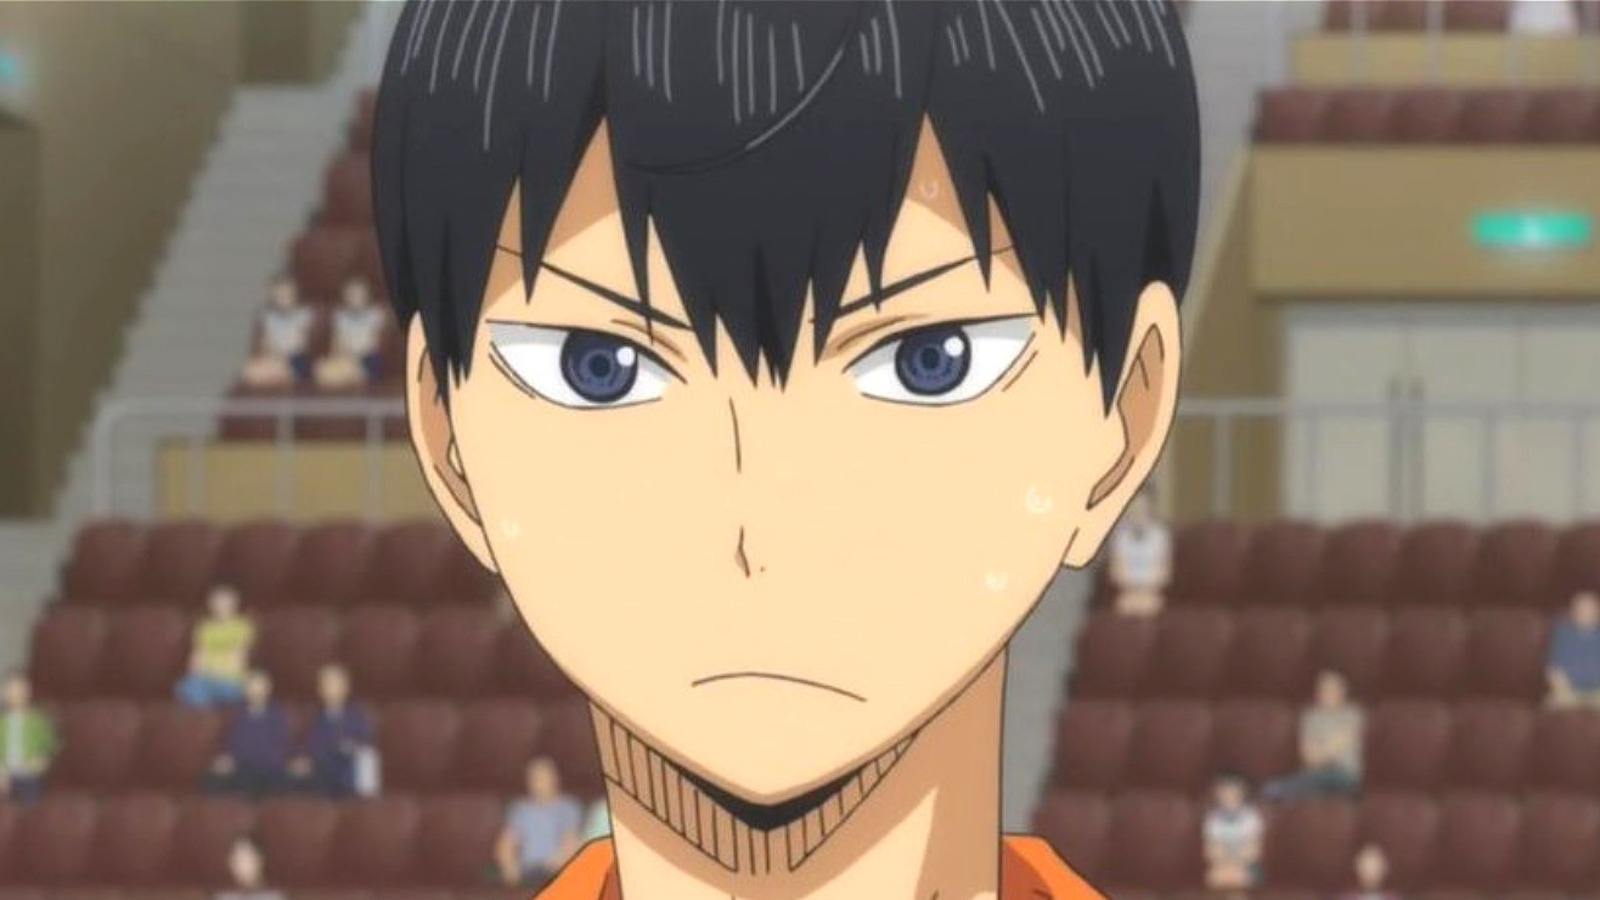 Haikyuu!! Facts That Prove How Much The Series Has Changed The Anime Game -  YouTube